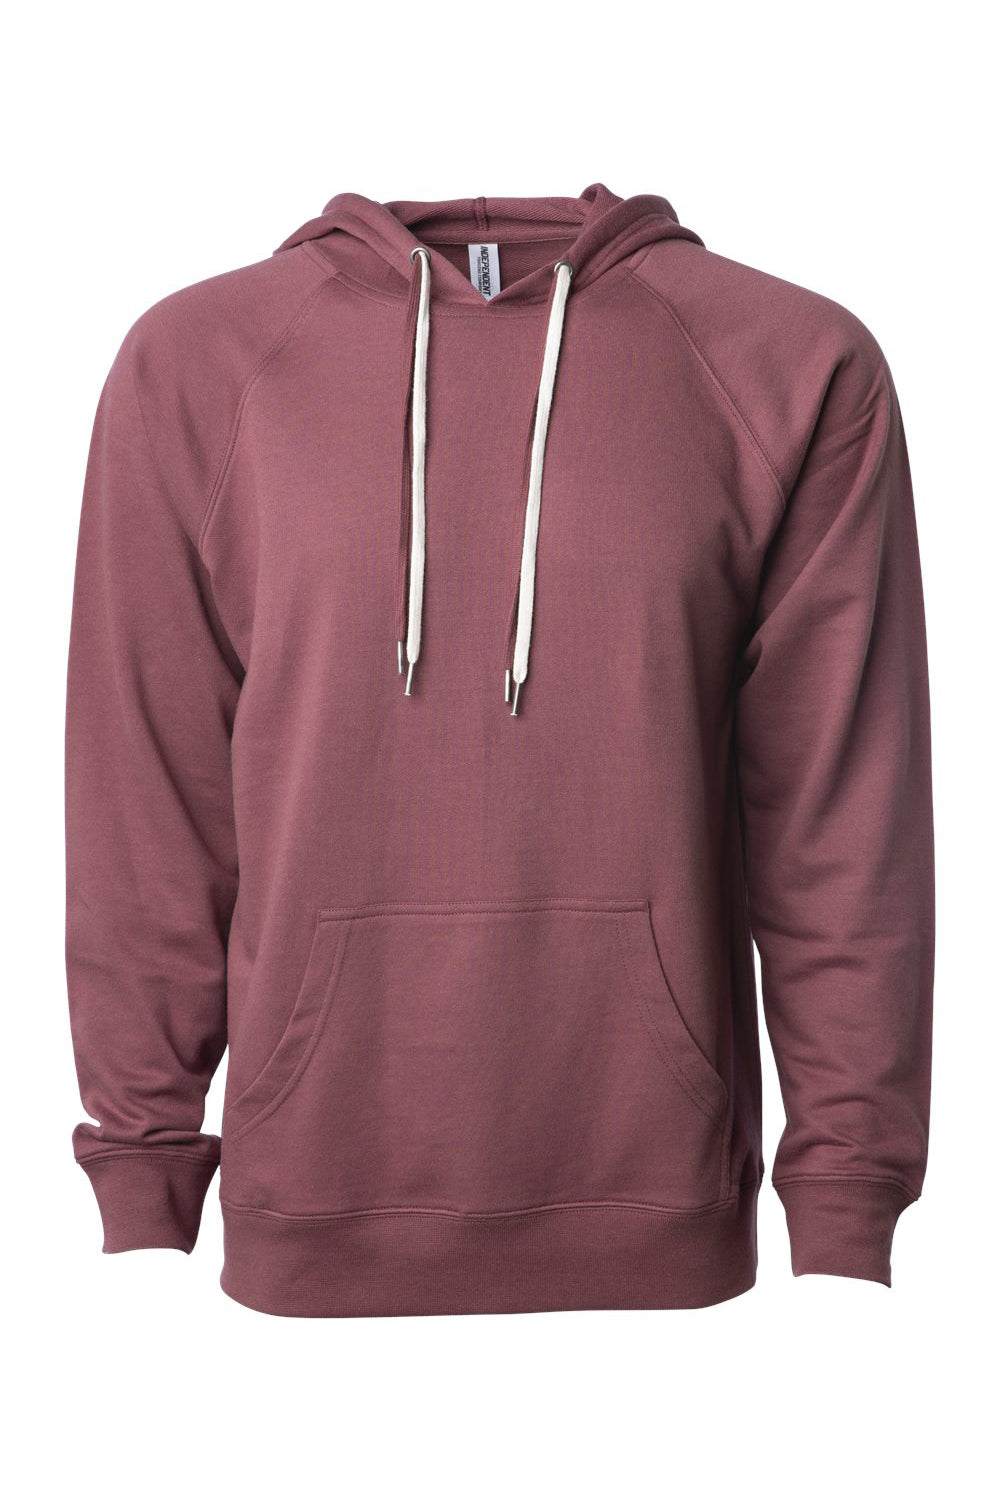 Independent Trading Co. SS1000 Mens Icon Loopback Terry Hooded Sweatshirt Hoodie Port Flat Front